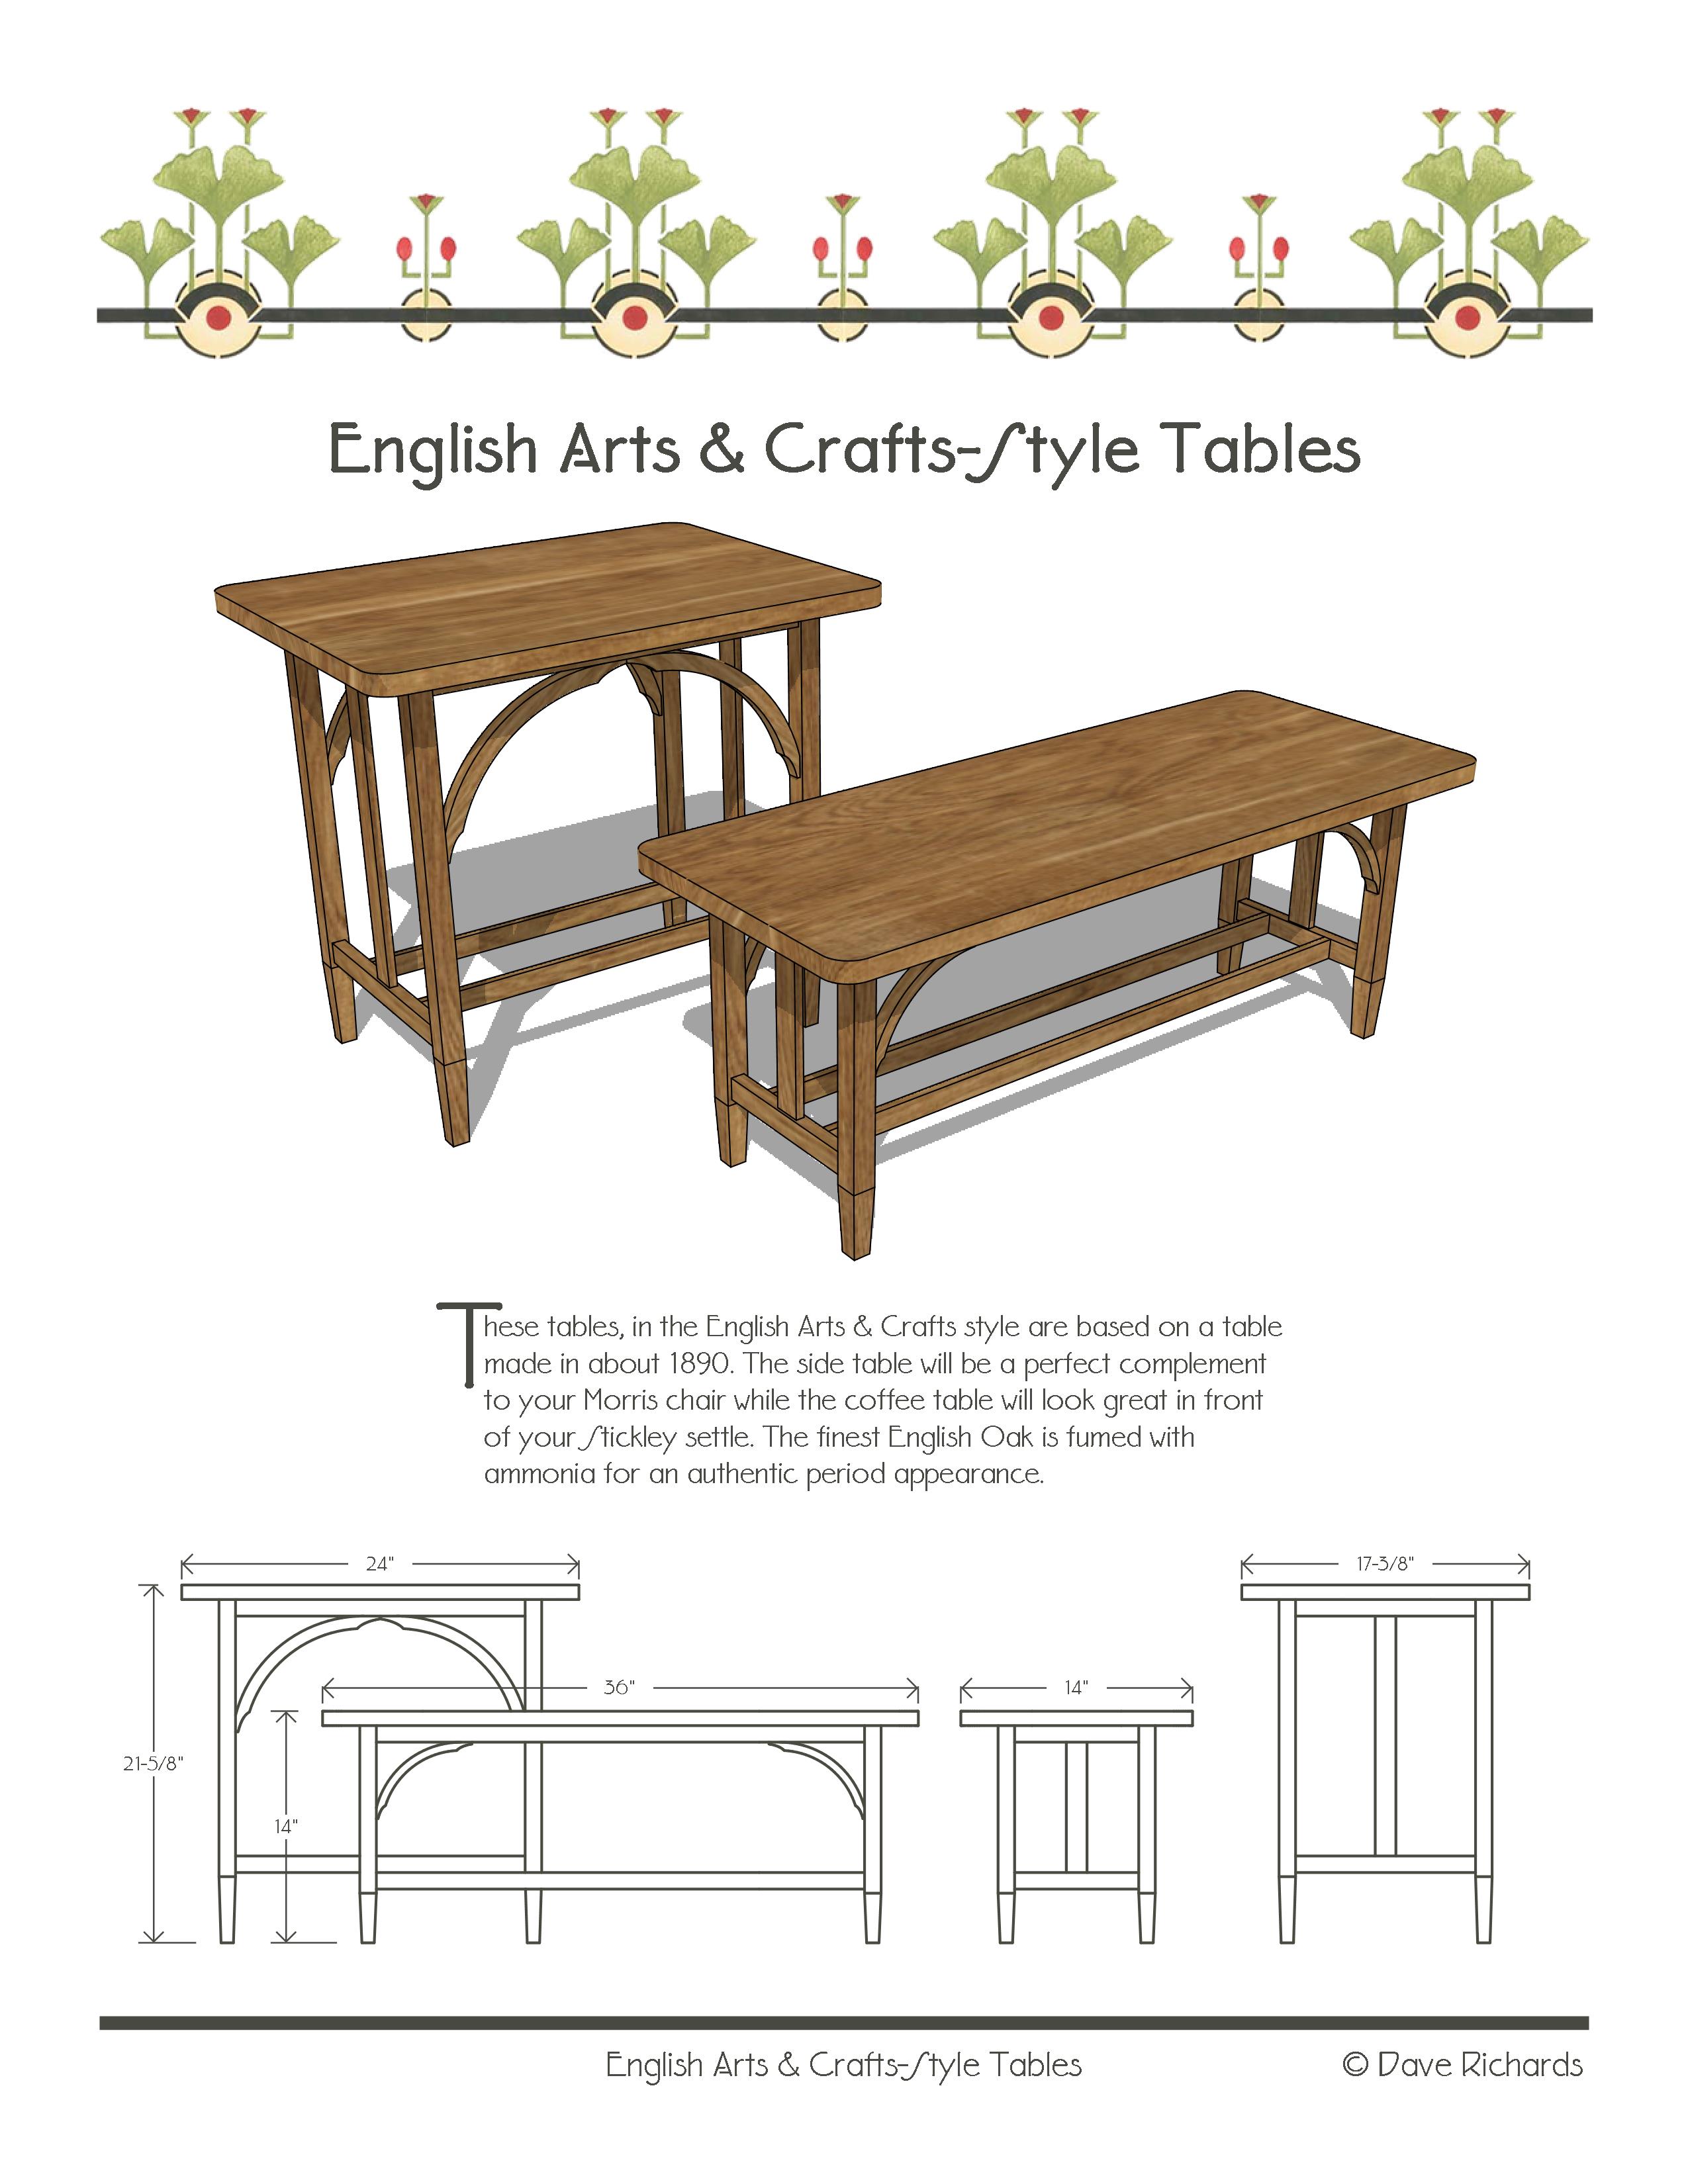 English Arts and Crafts Tables_1.jpg